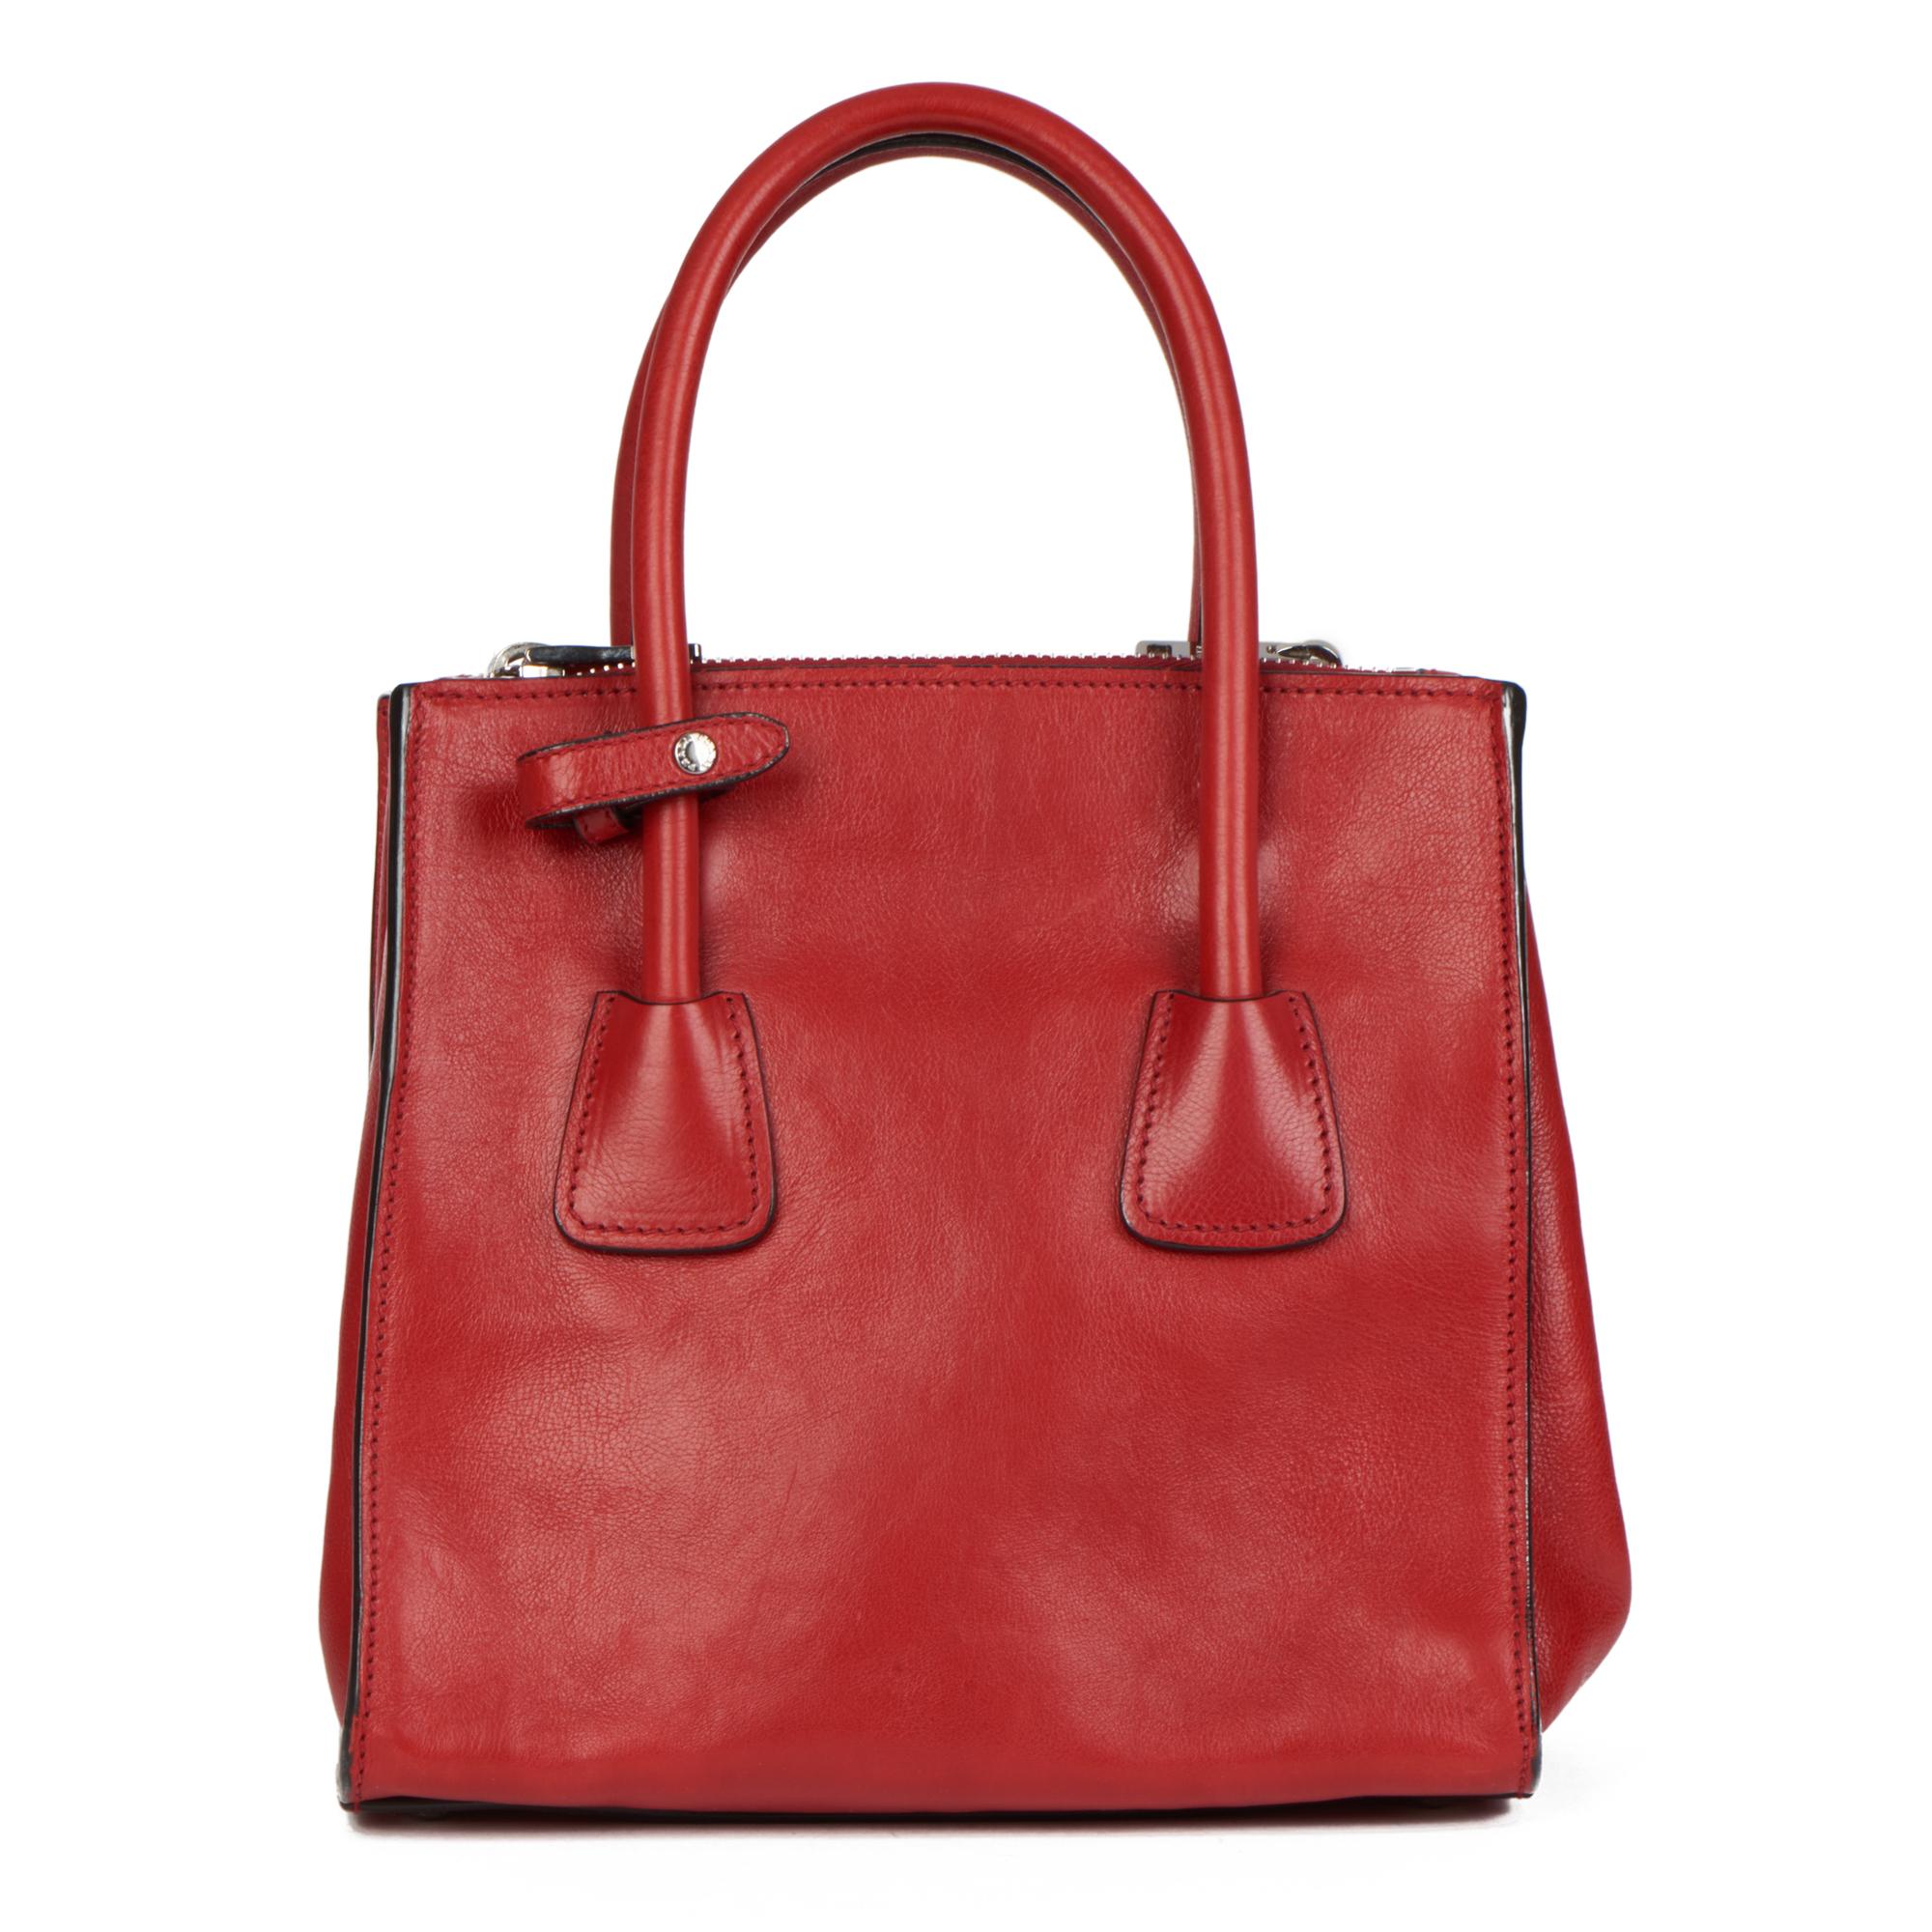 Red Prada FUOCO GLACE CALFSKIN LEATHER TWIN POCKET DOUBLE HANDLE TOTE